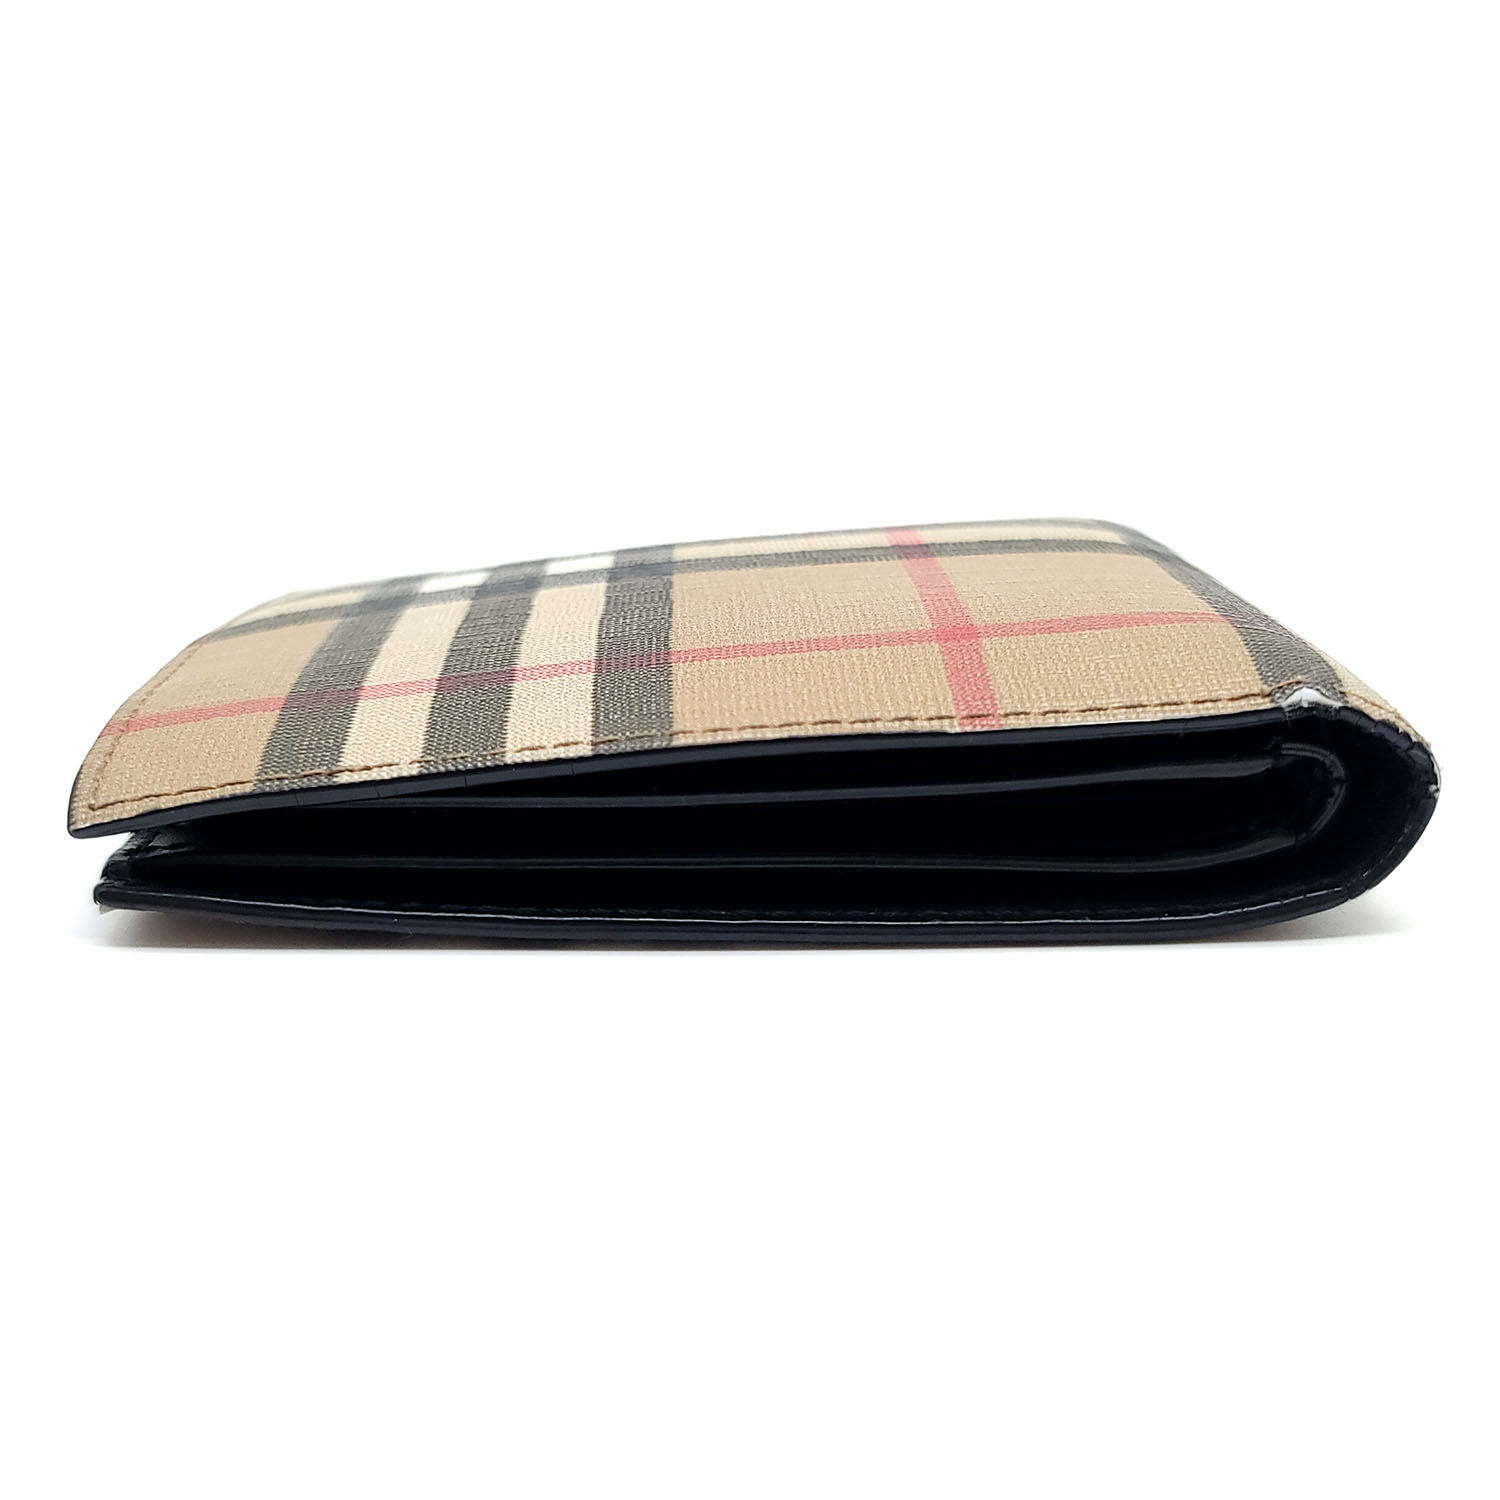 NWT Burberry Vintage Check Wallet +PRICE IS FIRM+